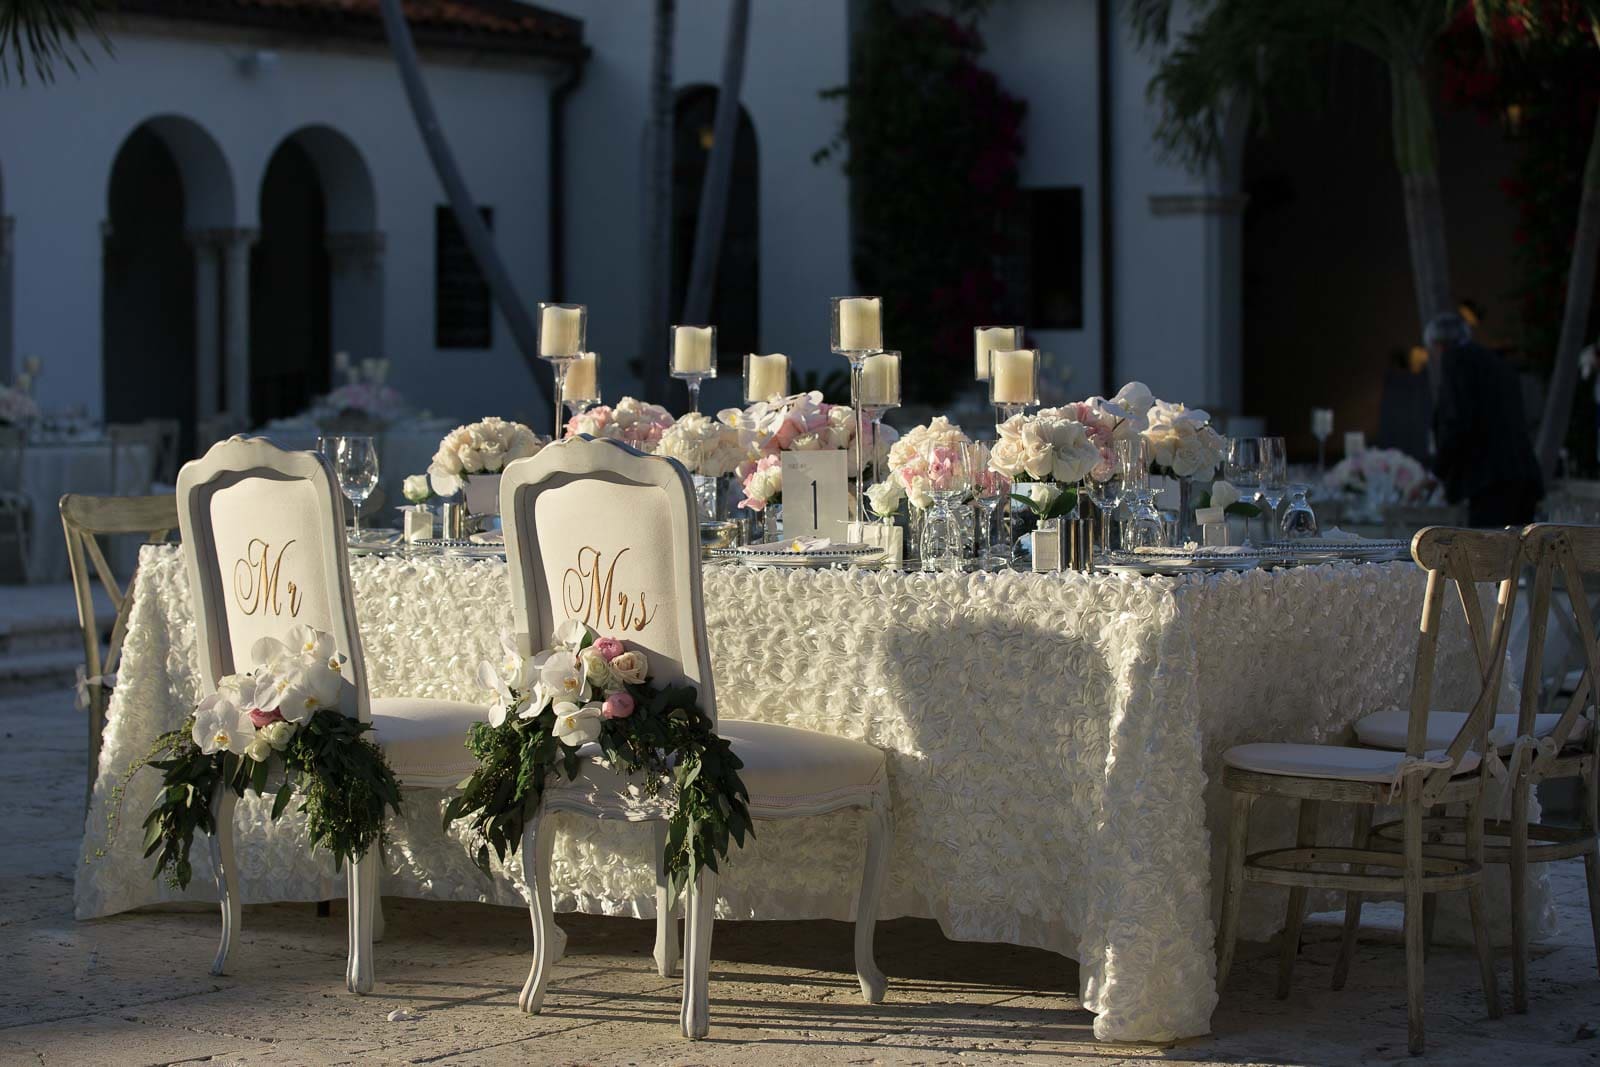 A table set up with white chairs and candles.